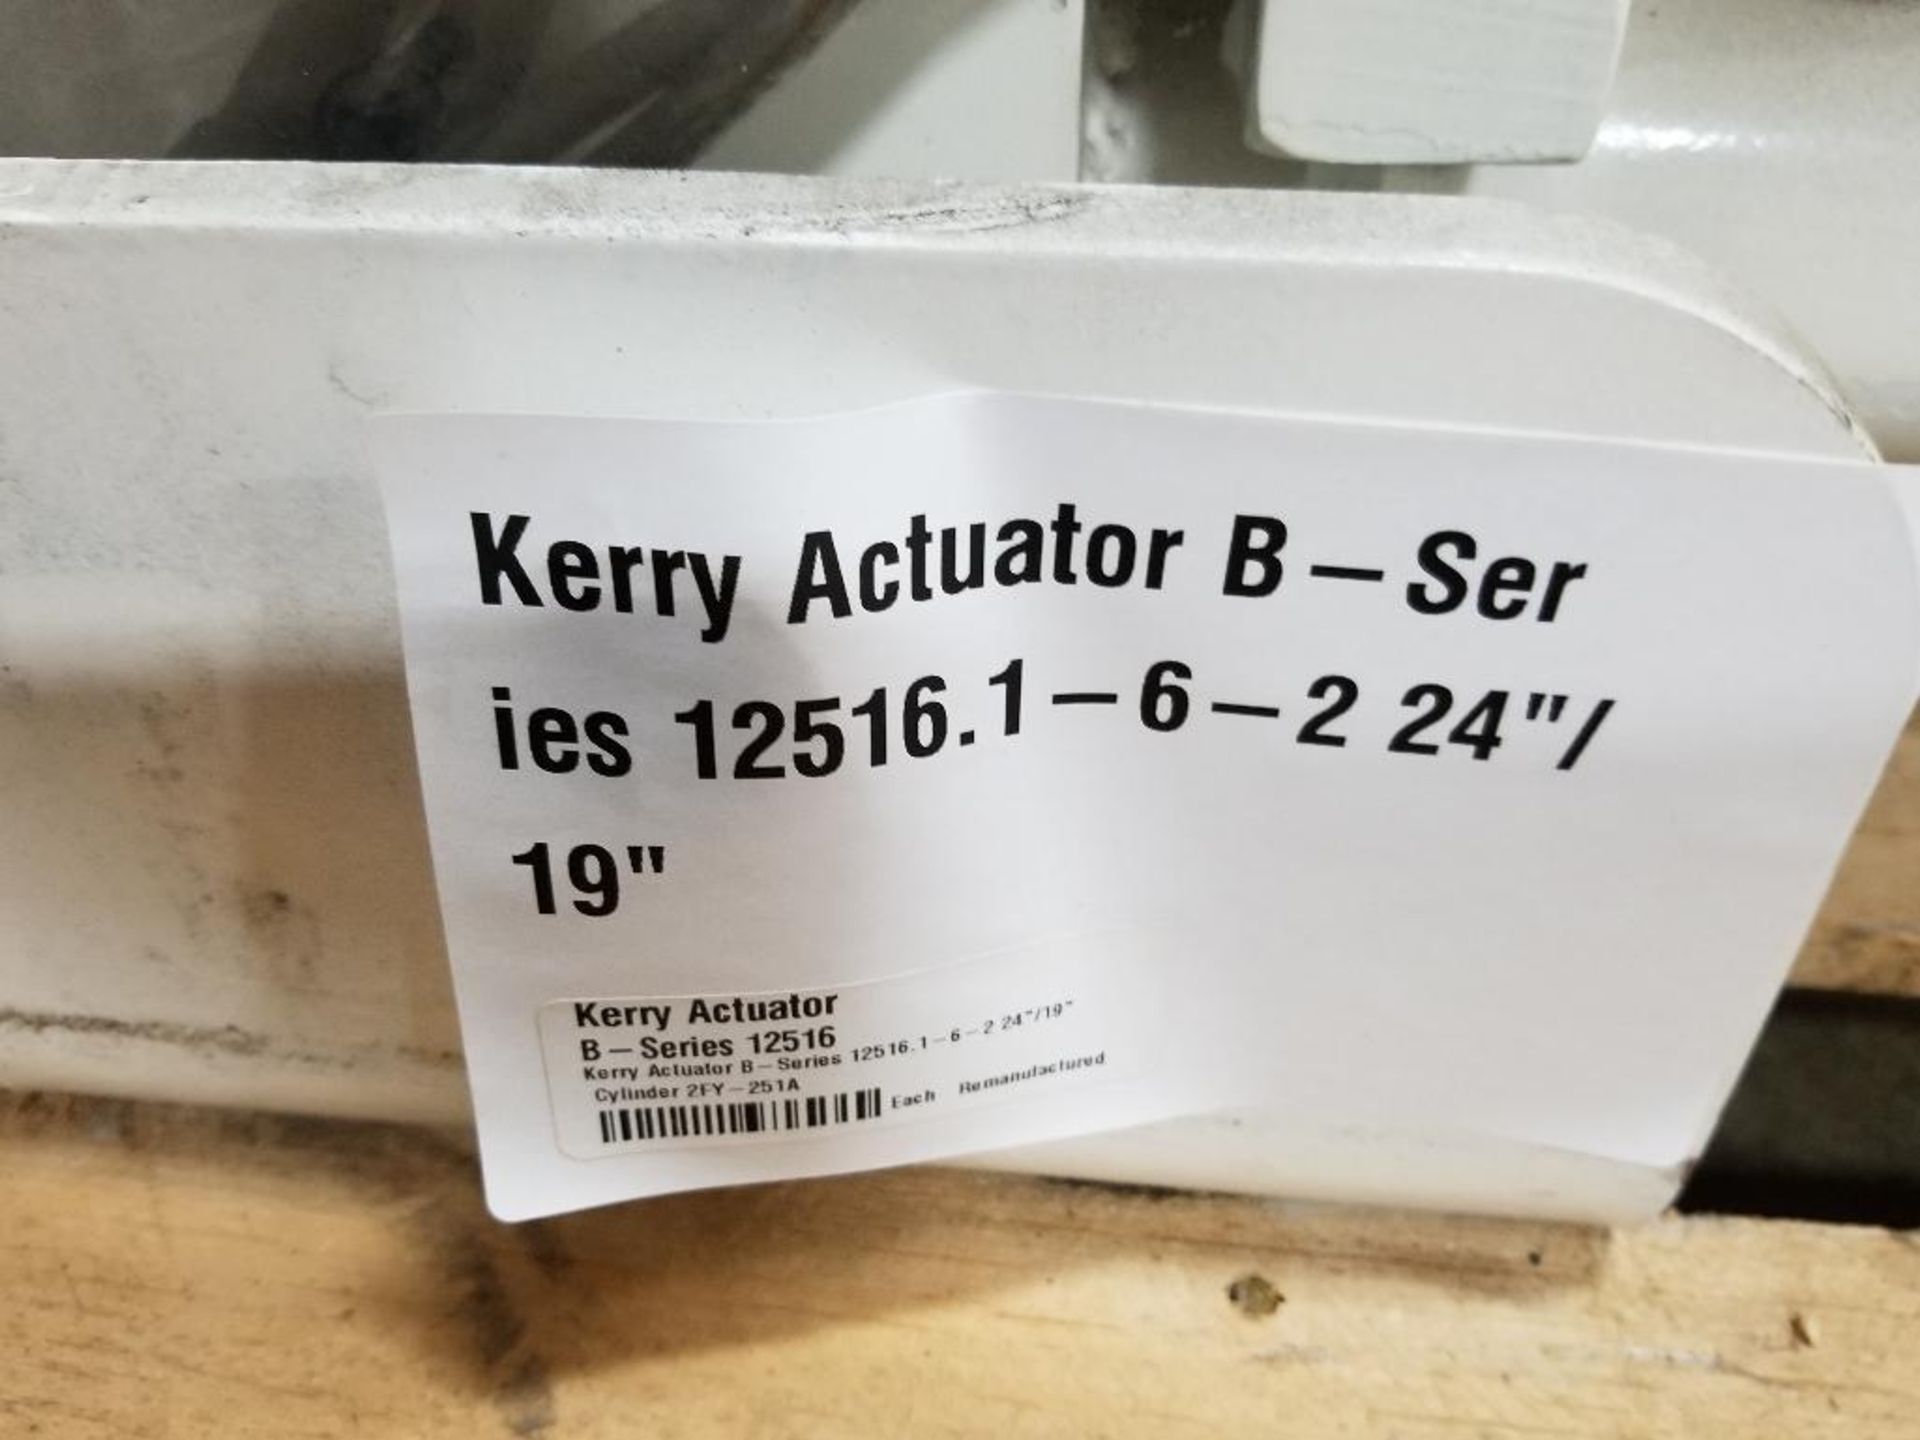 Kerry Actuators B-series 12516.1-6-2. 24". Appears new. - Image 5 of 5